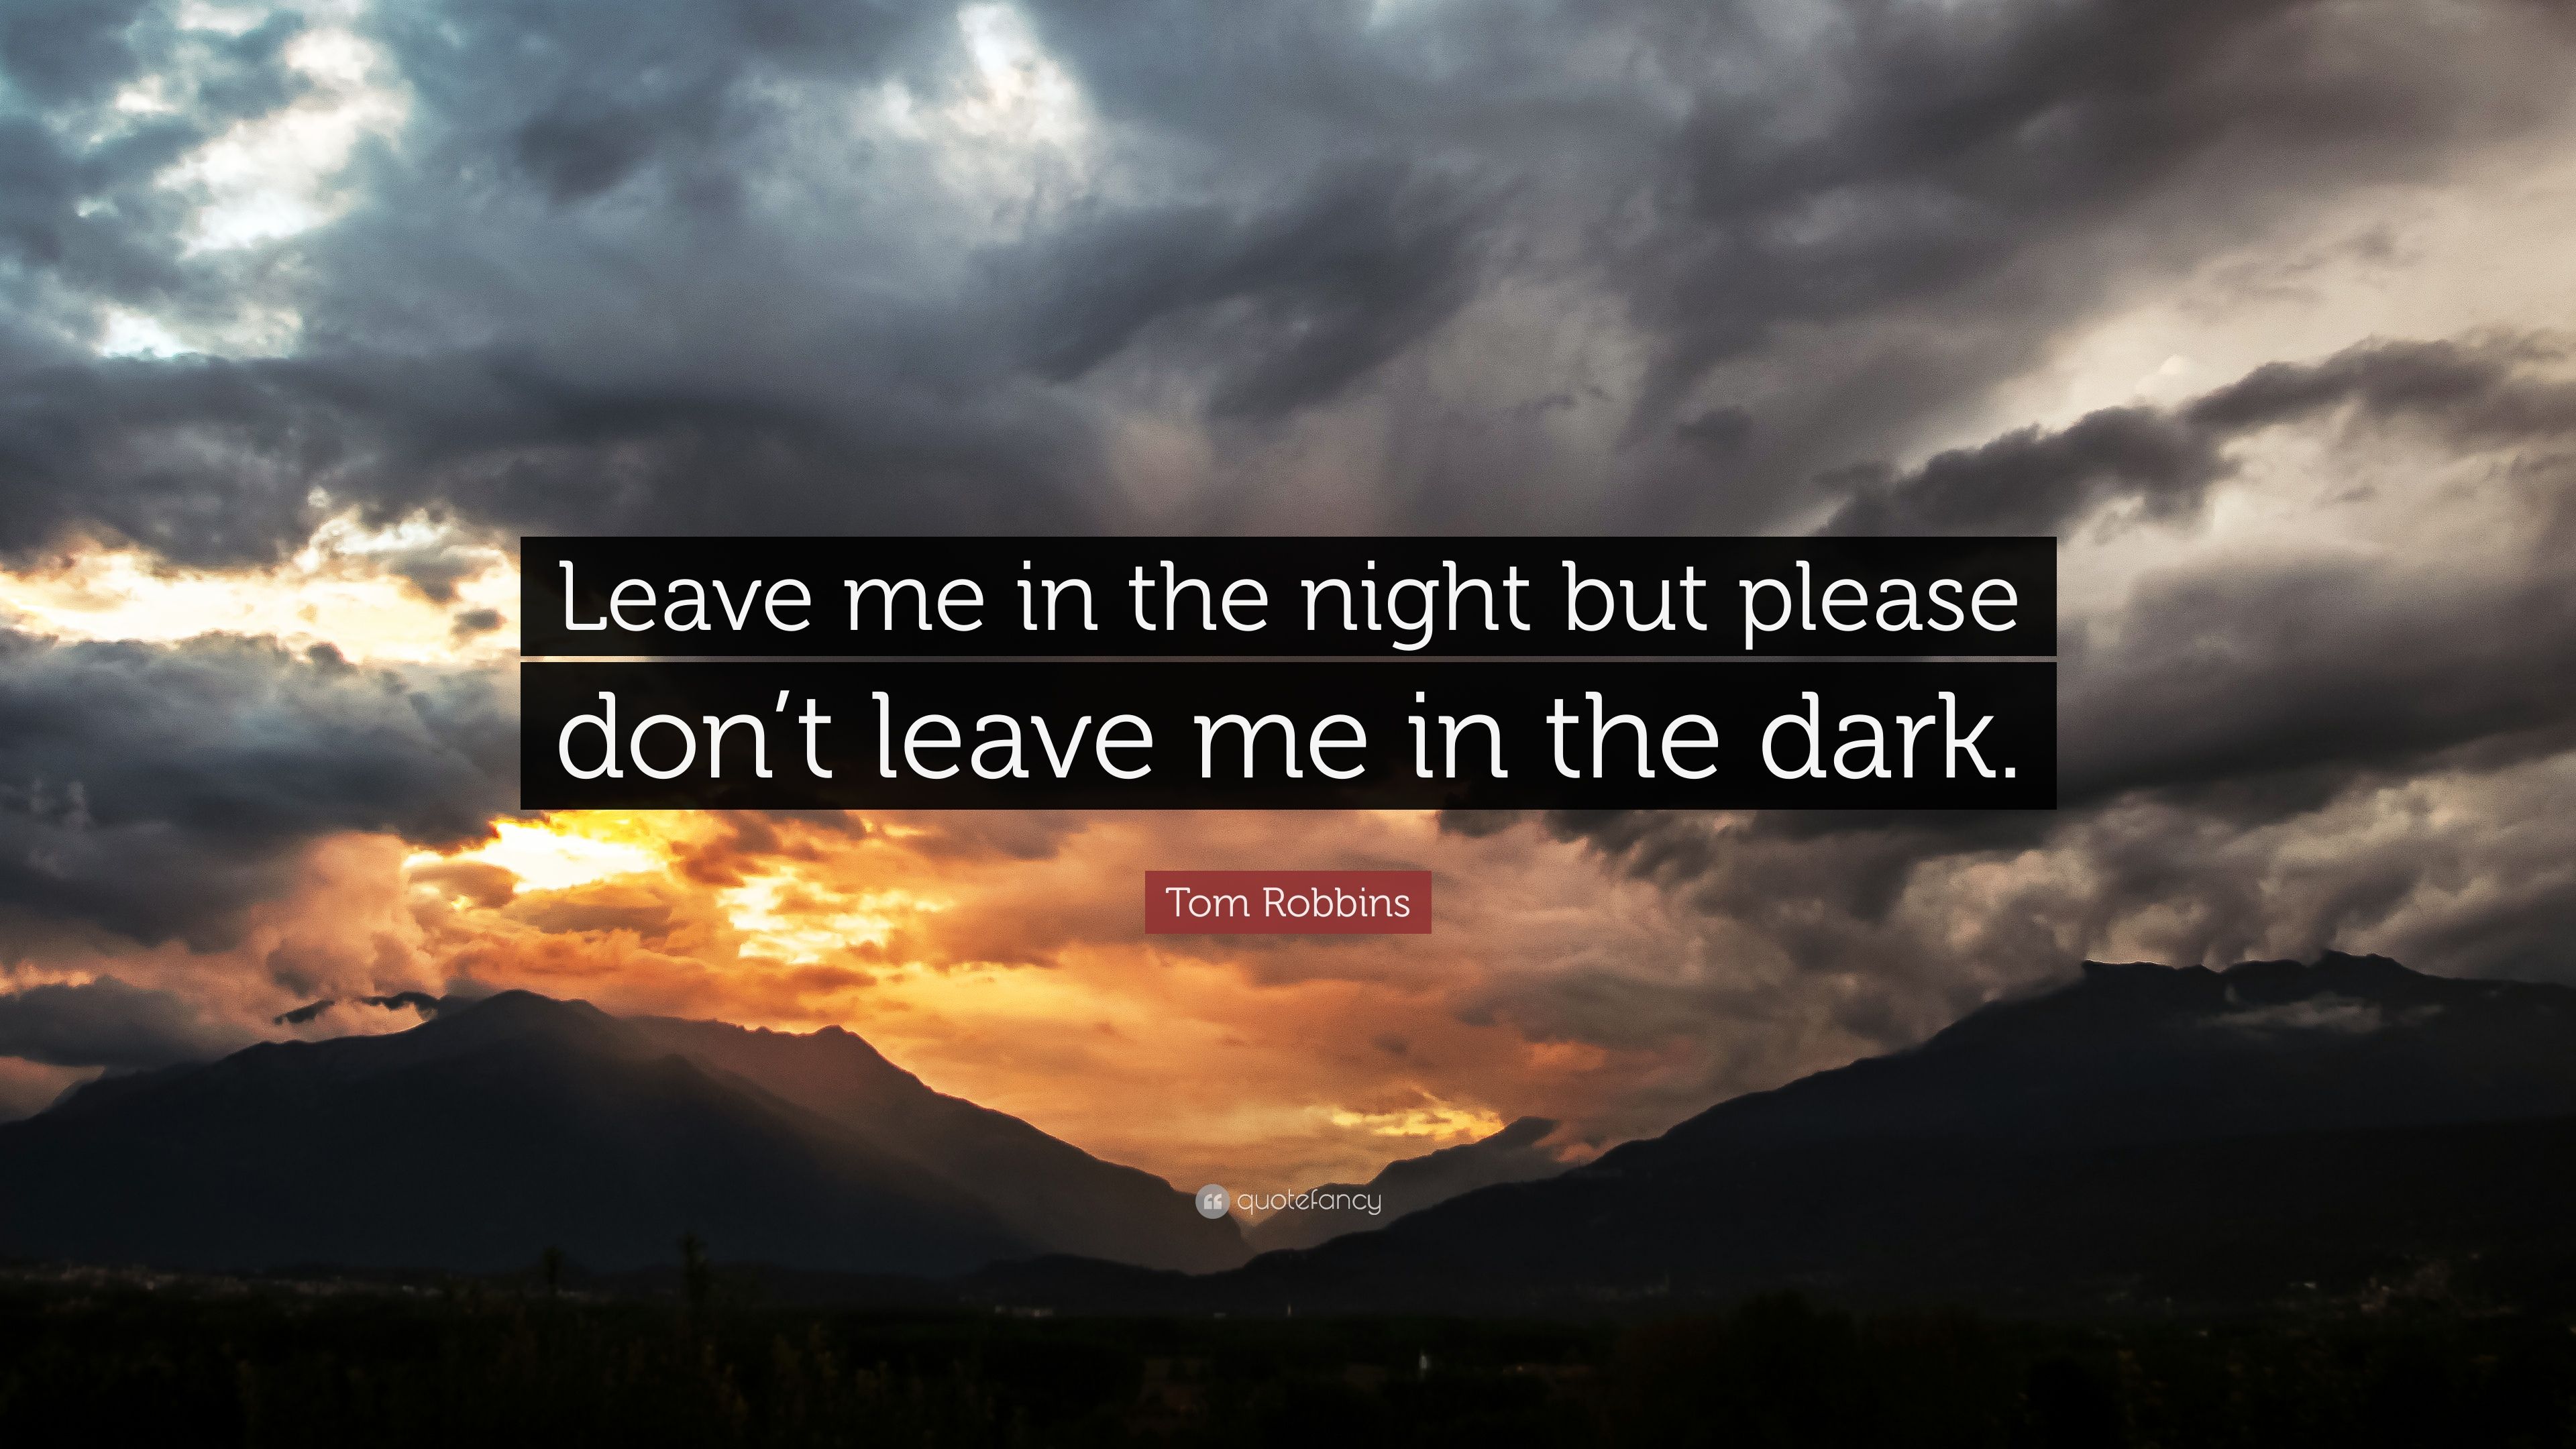 Tom Robbins Quote: “Leave me in the night but please don't leave